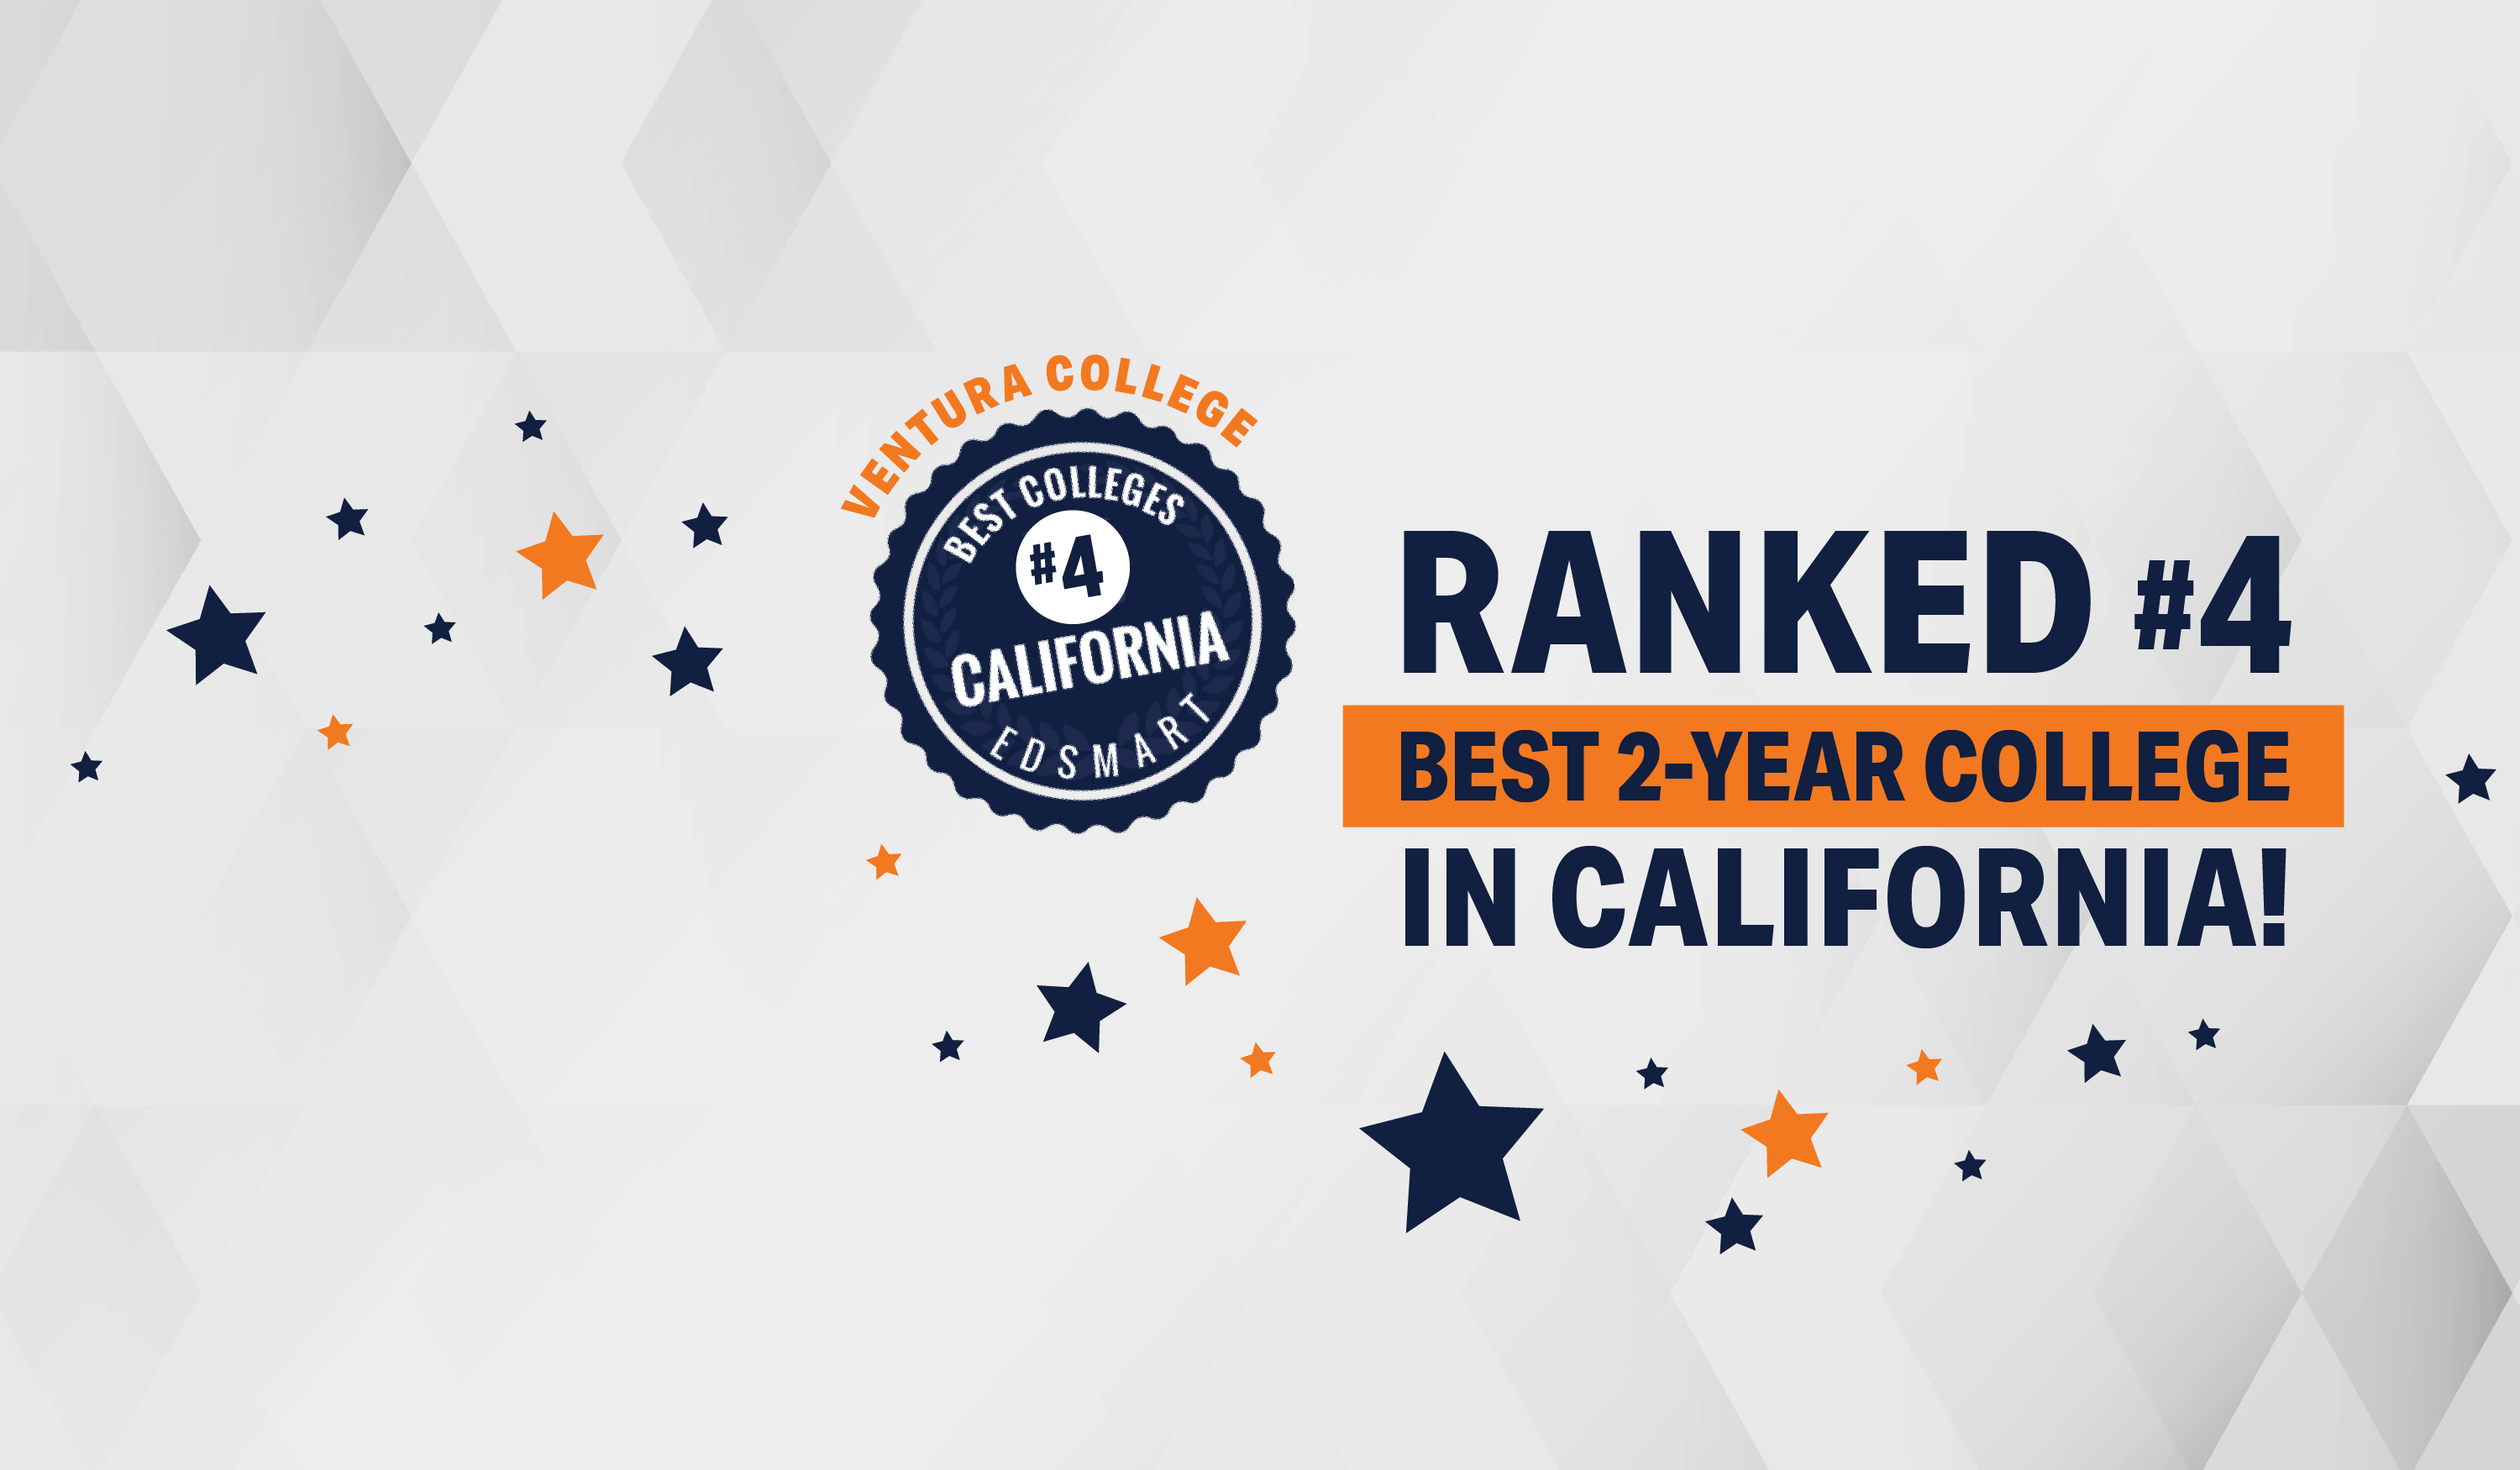 ranked #4 best 2-year college in california